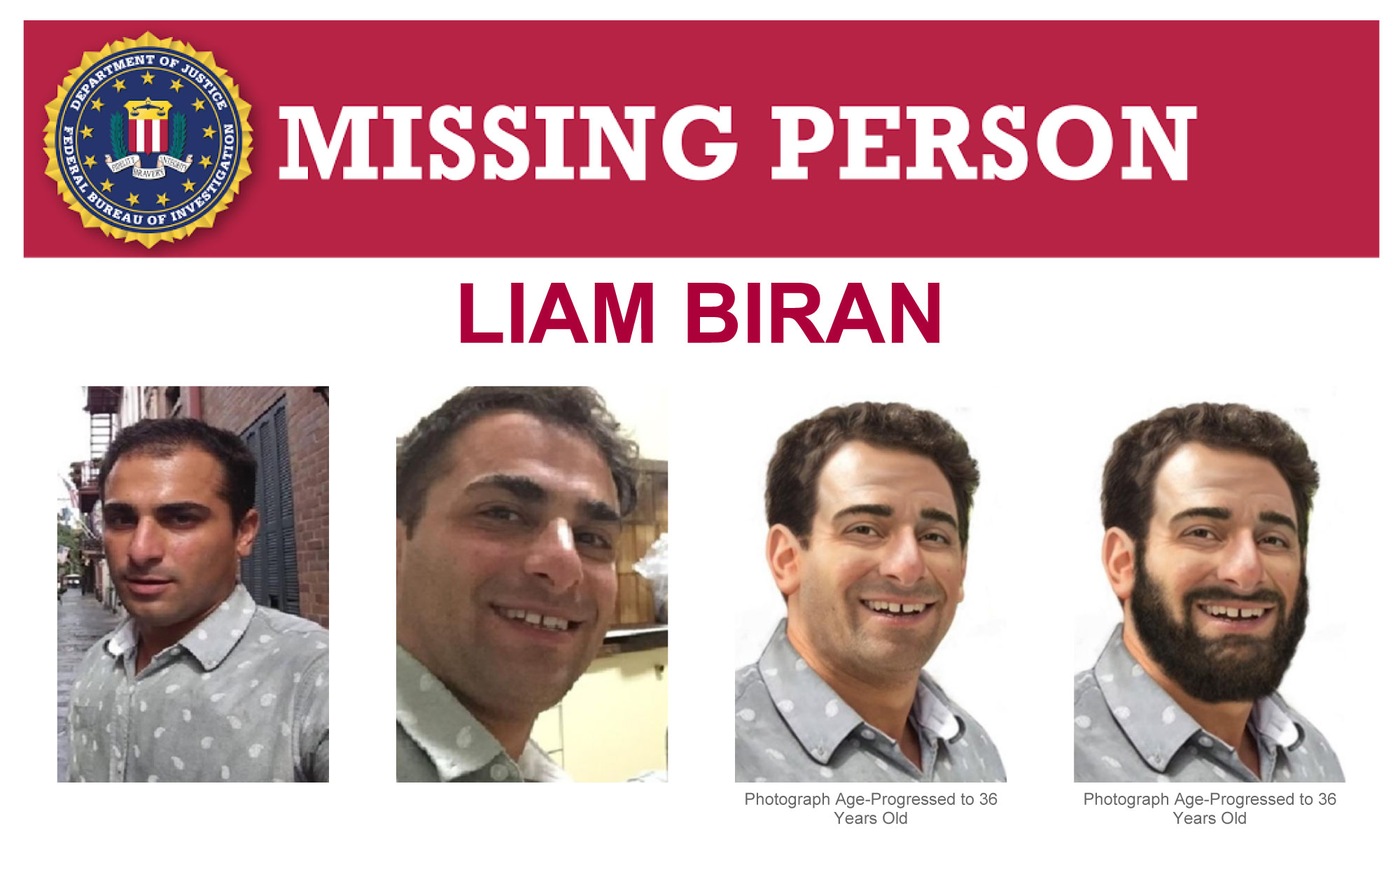 This graphic shows photos and age-progressed images of Liam Biran, an American who went missing in 2019 while traveling.